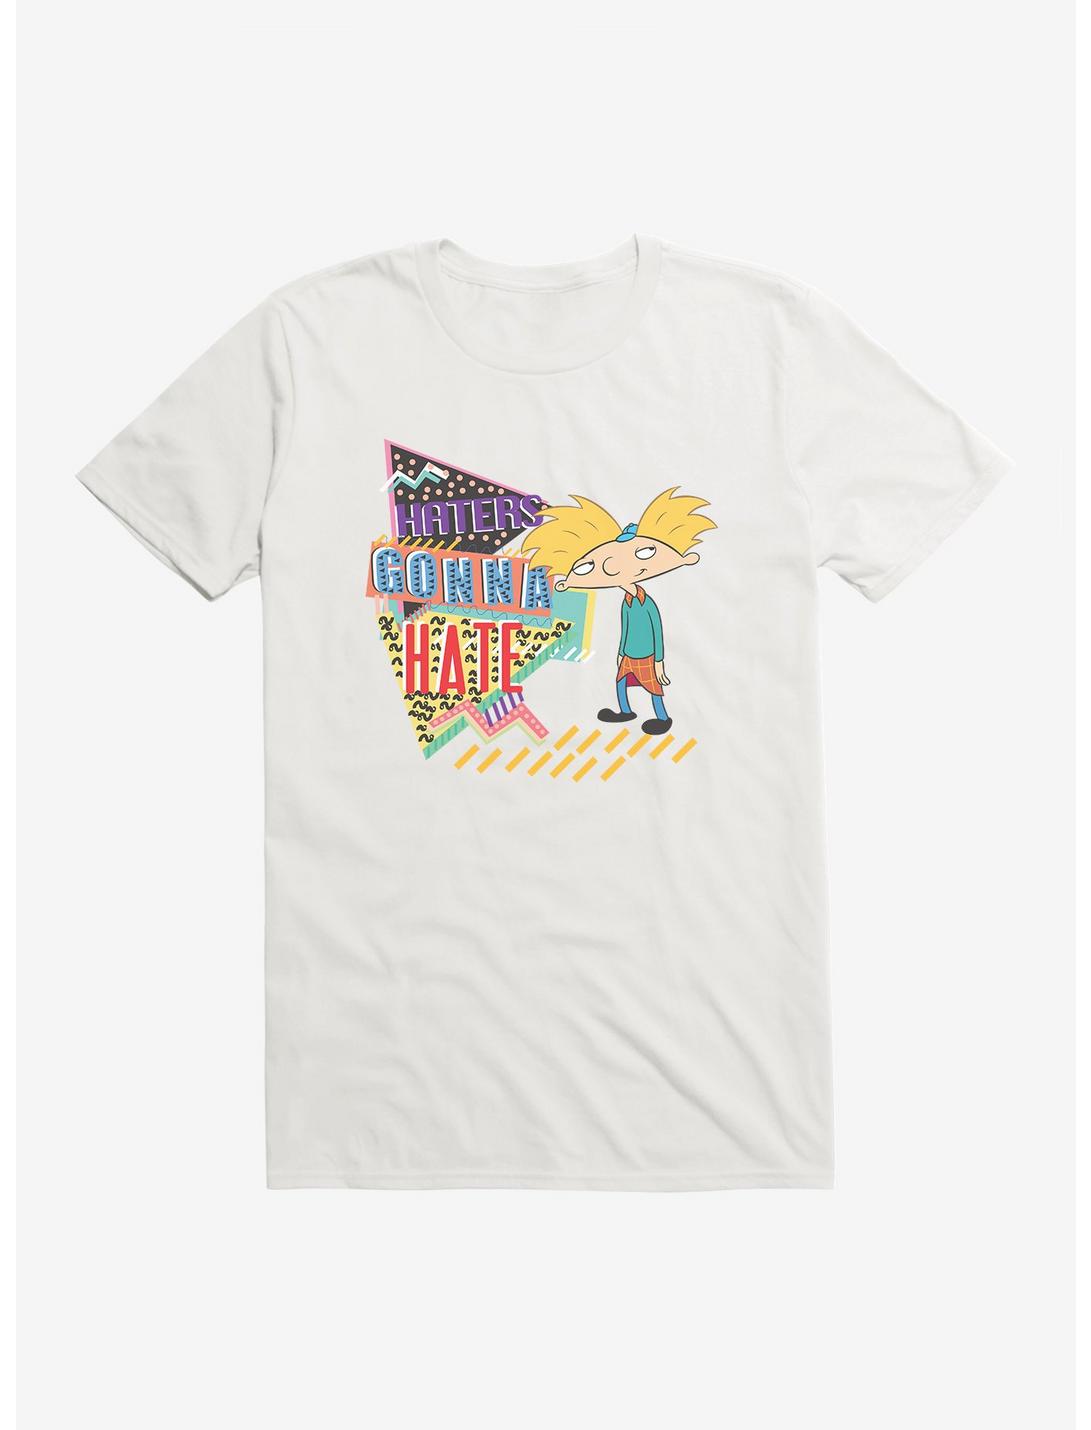 Hey Arnold! Haters Gonna Hate T-Shirt, WHITE, hi-res